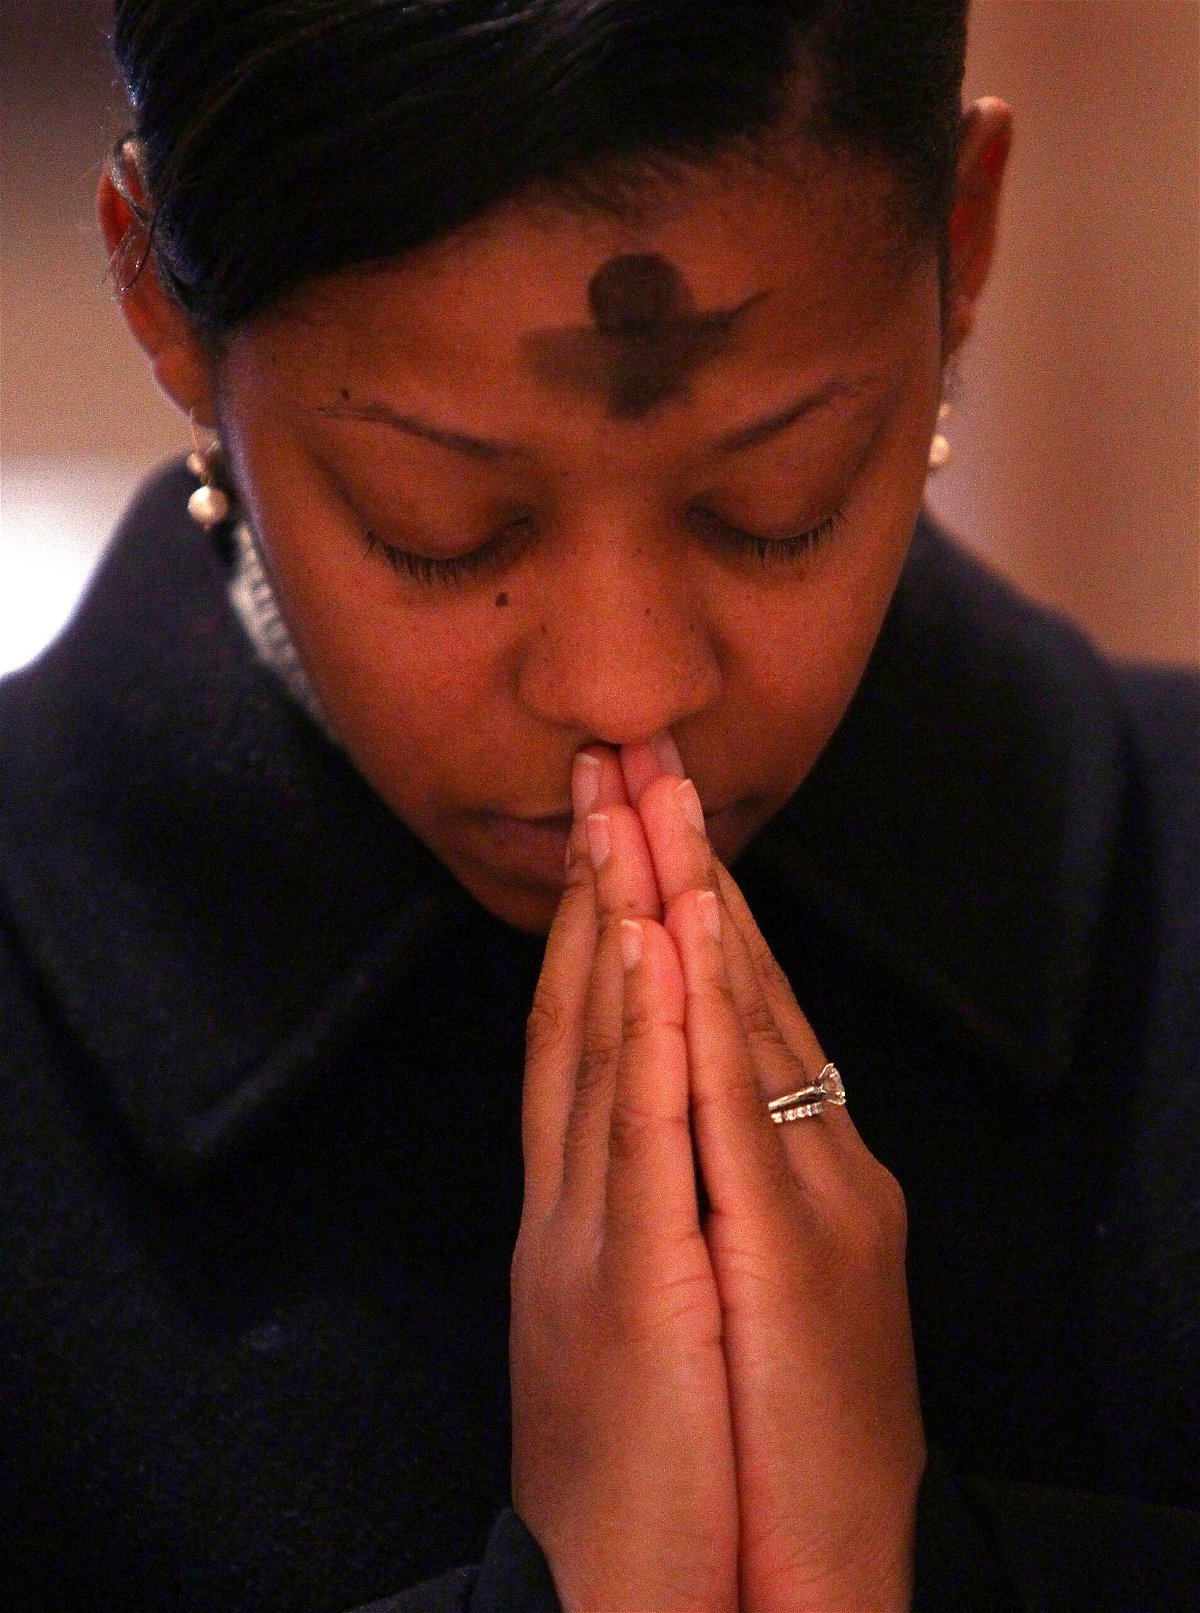 <i>Win McNamee/Getty Images</i><br/>A young woman prays during an Ash Wednesday Mass at the Cathedral of Saint Matthew the Apostle in February of 2010 in Washington